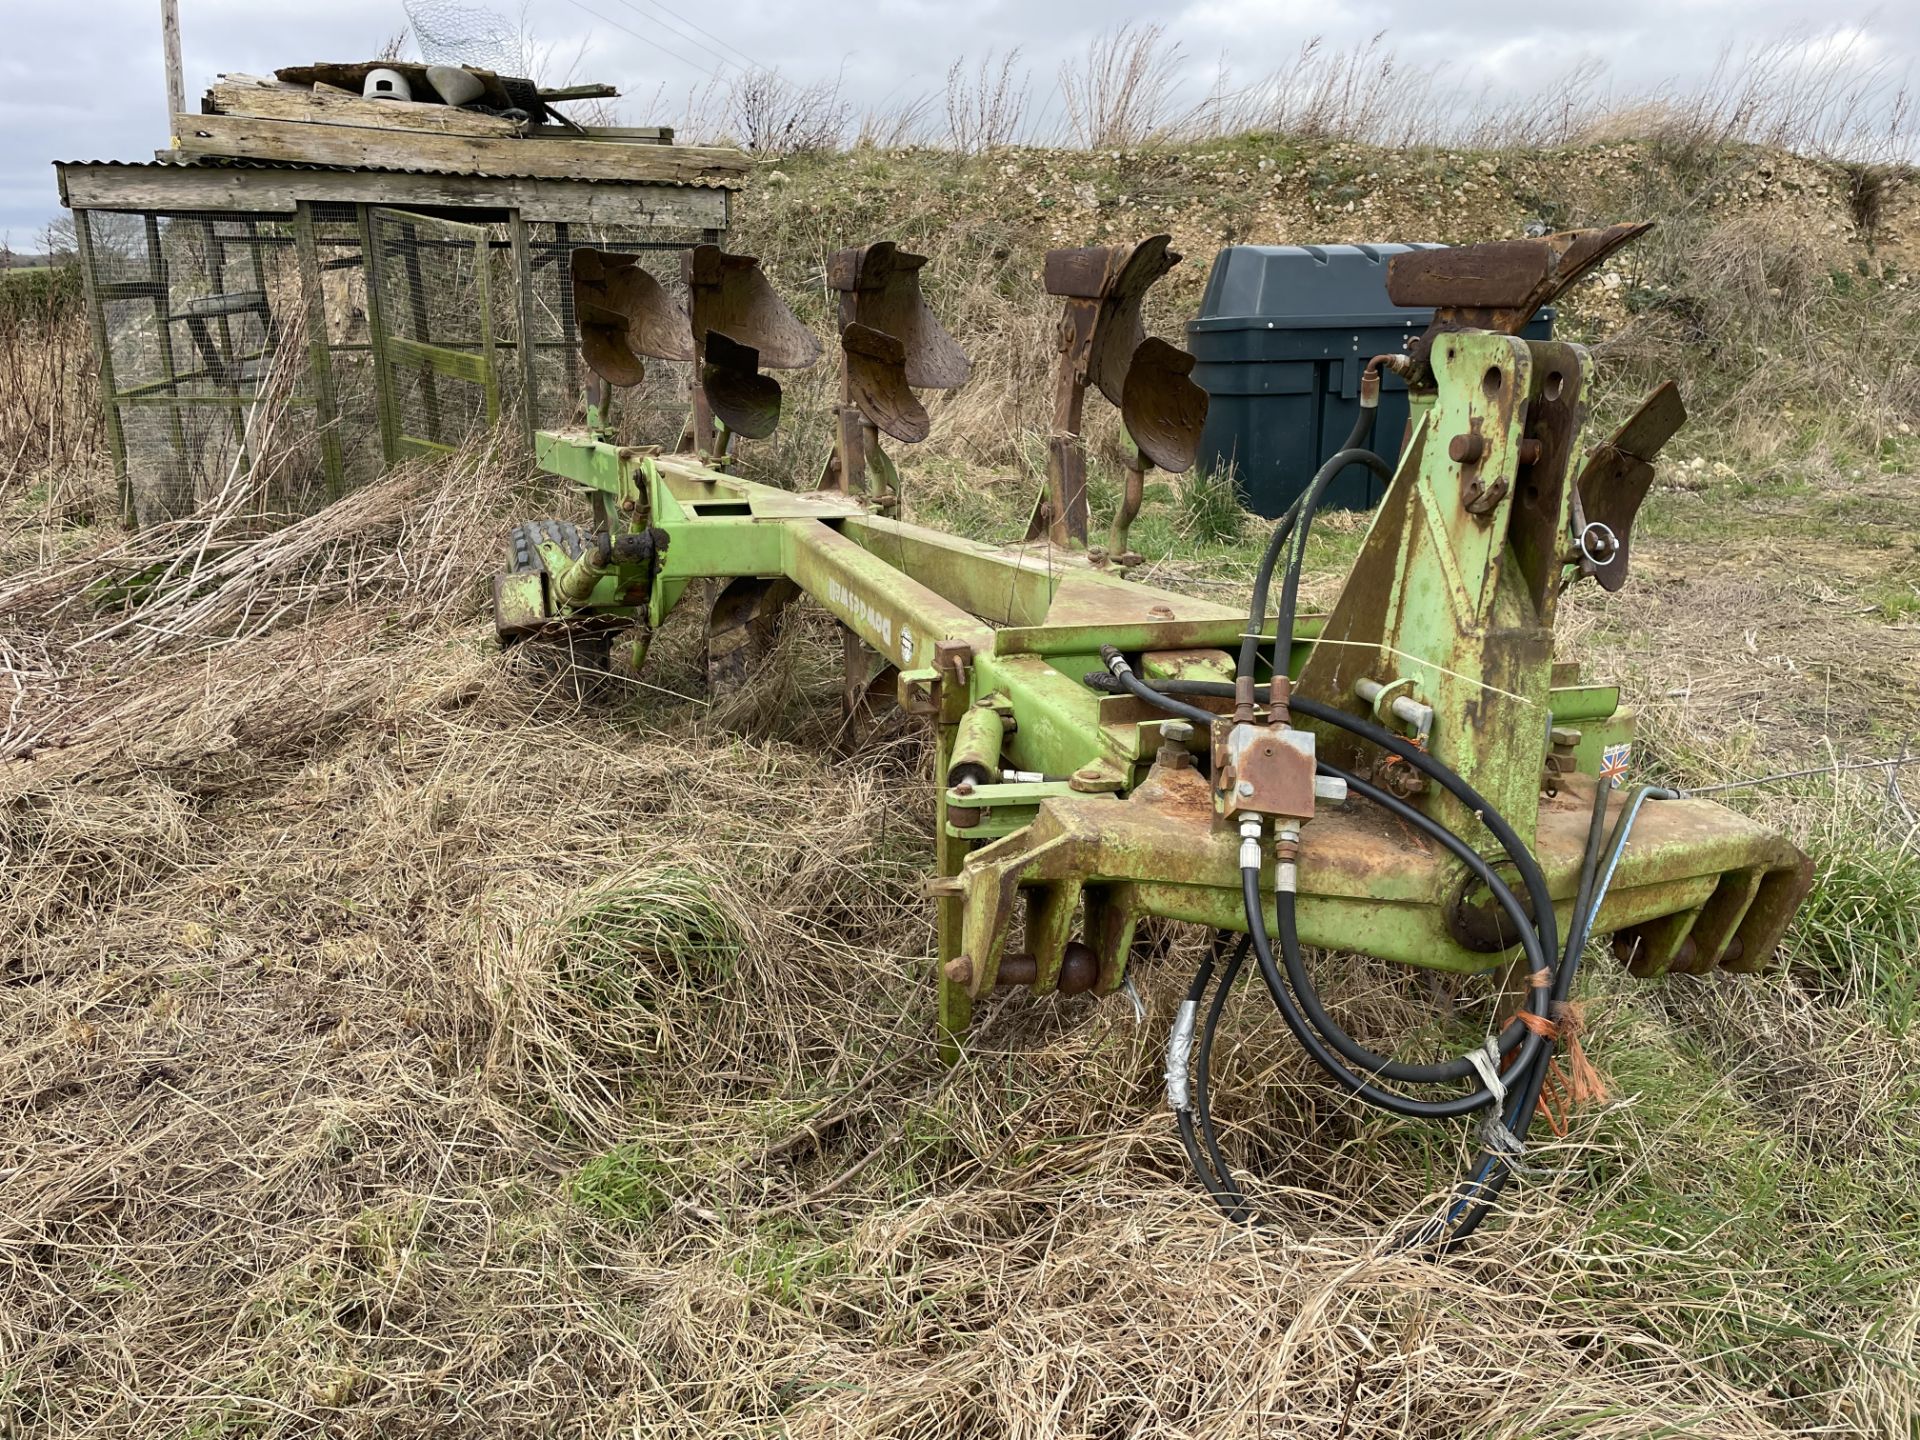 1991 Dowdswell DP7D/2 4 plus 1 5 furrow reversible plough, owned from new - Subject to VAT - Bild 2 aus 2